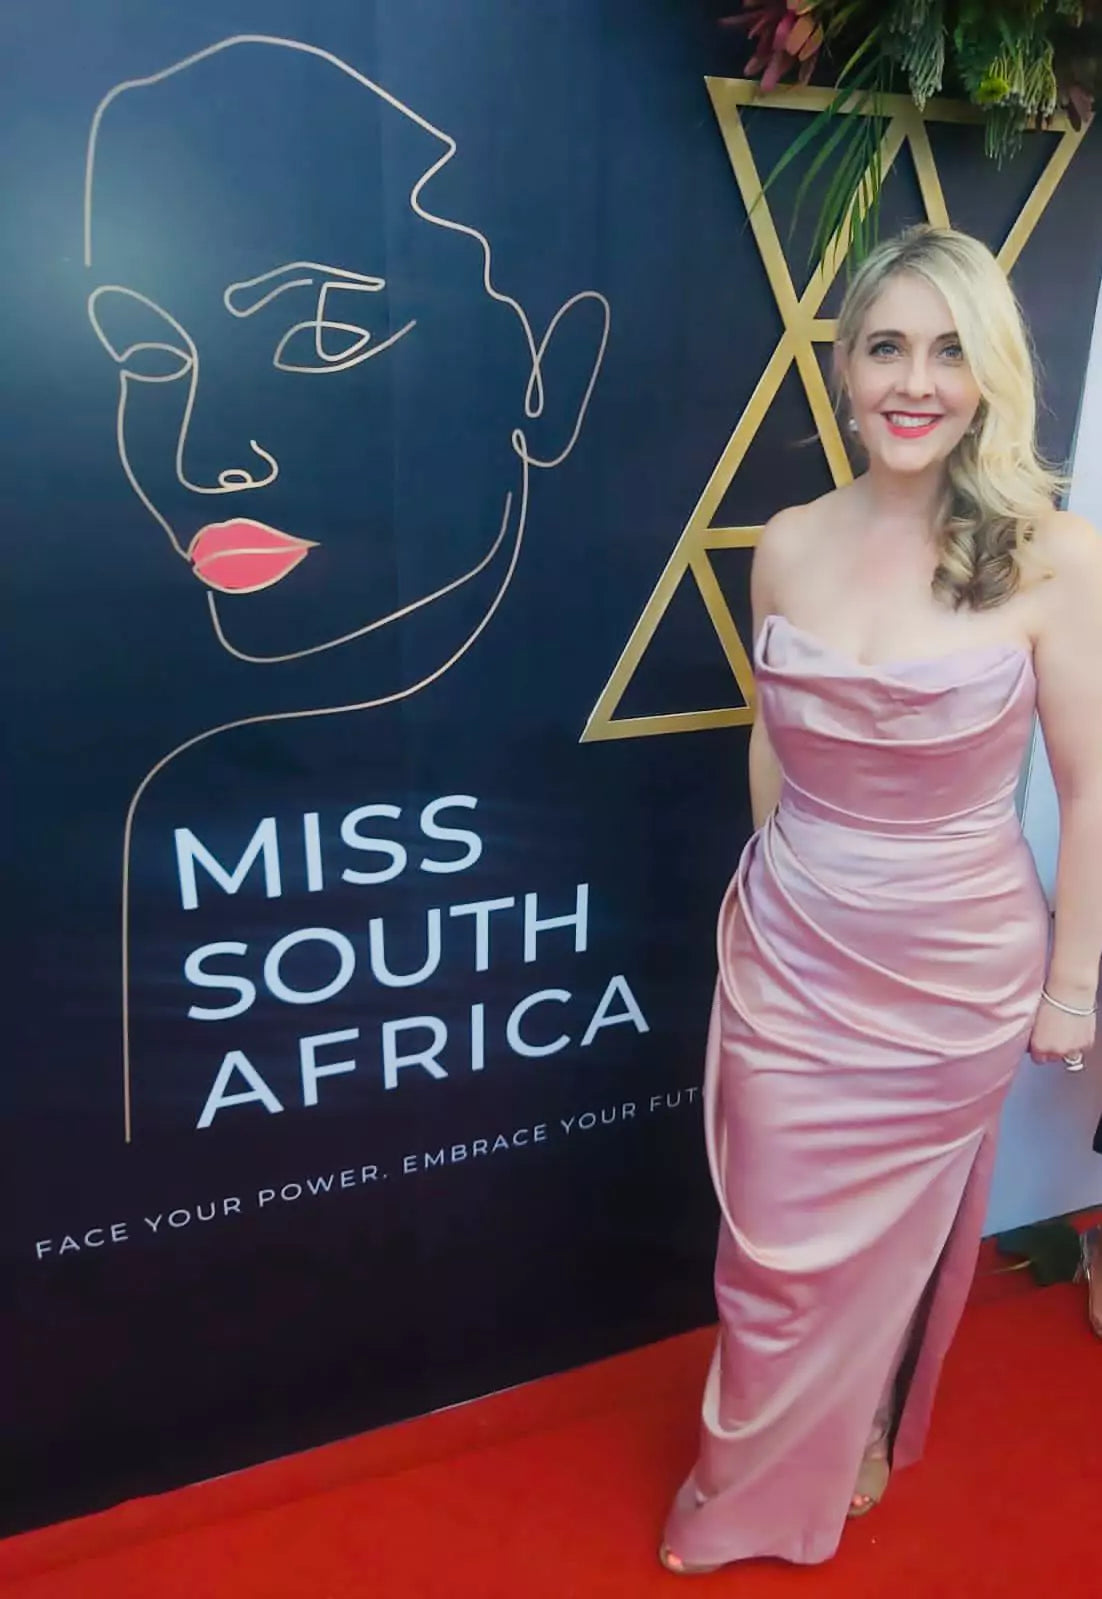 A woman in a pink dress standing in front of a miss south africa sign.